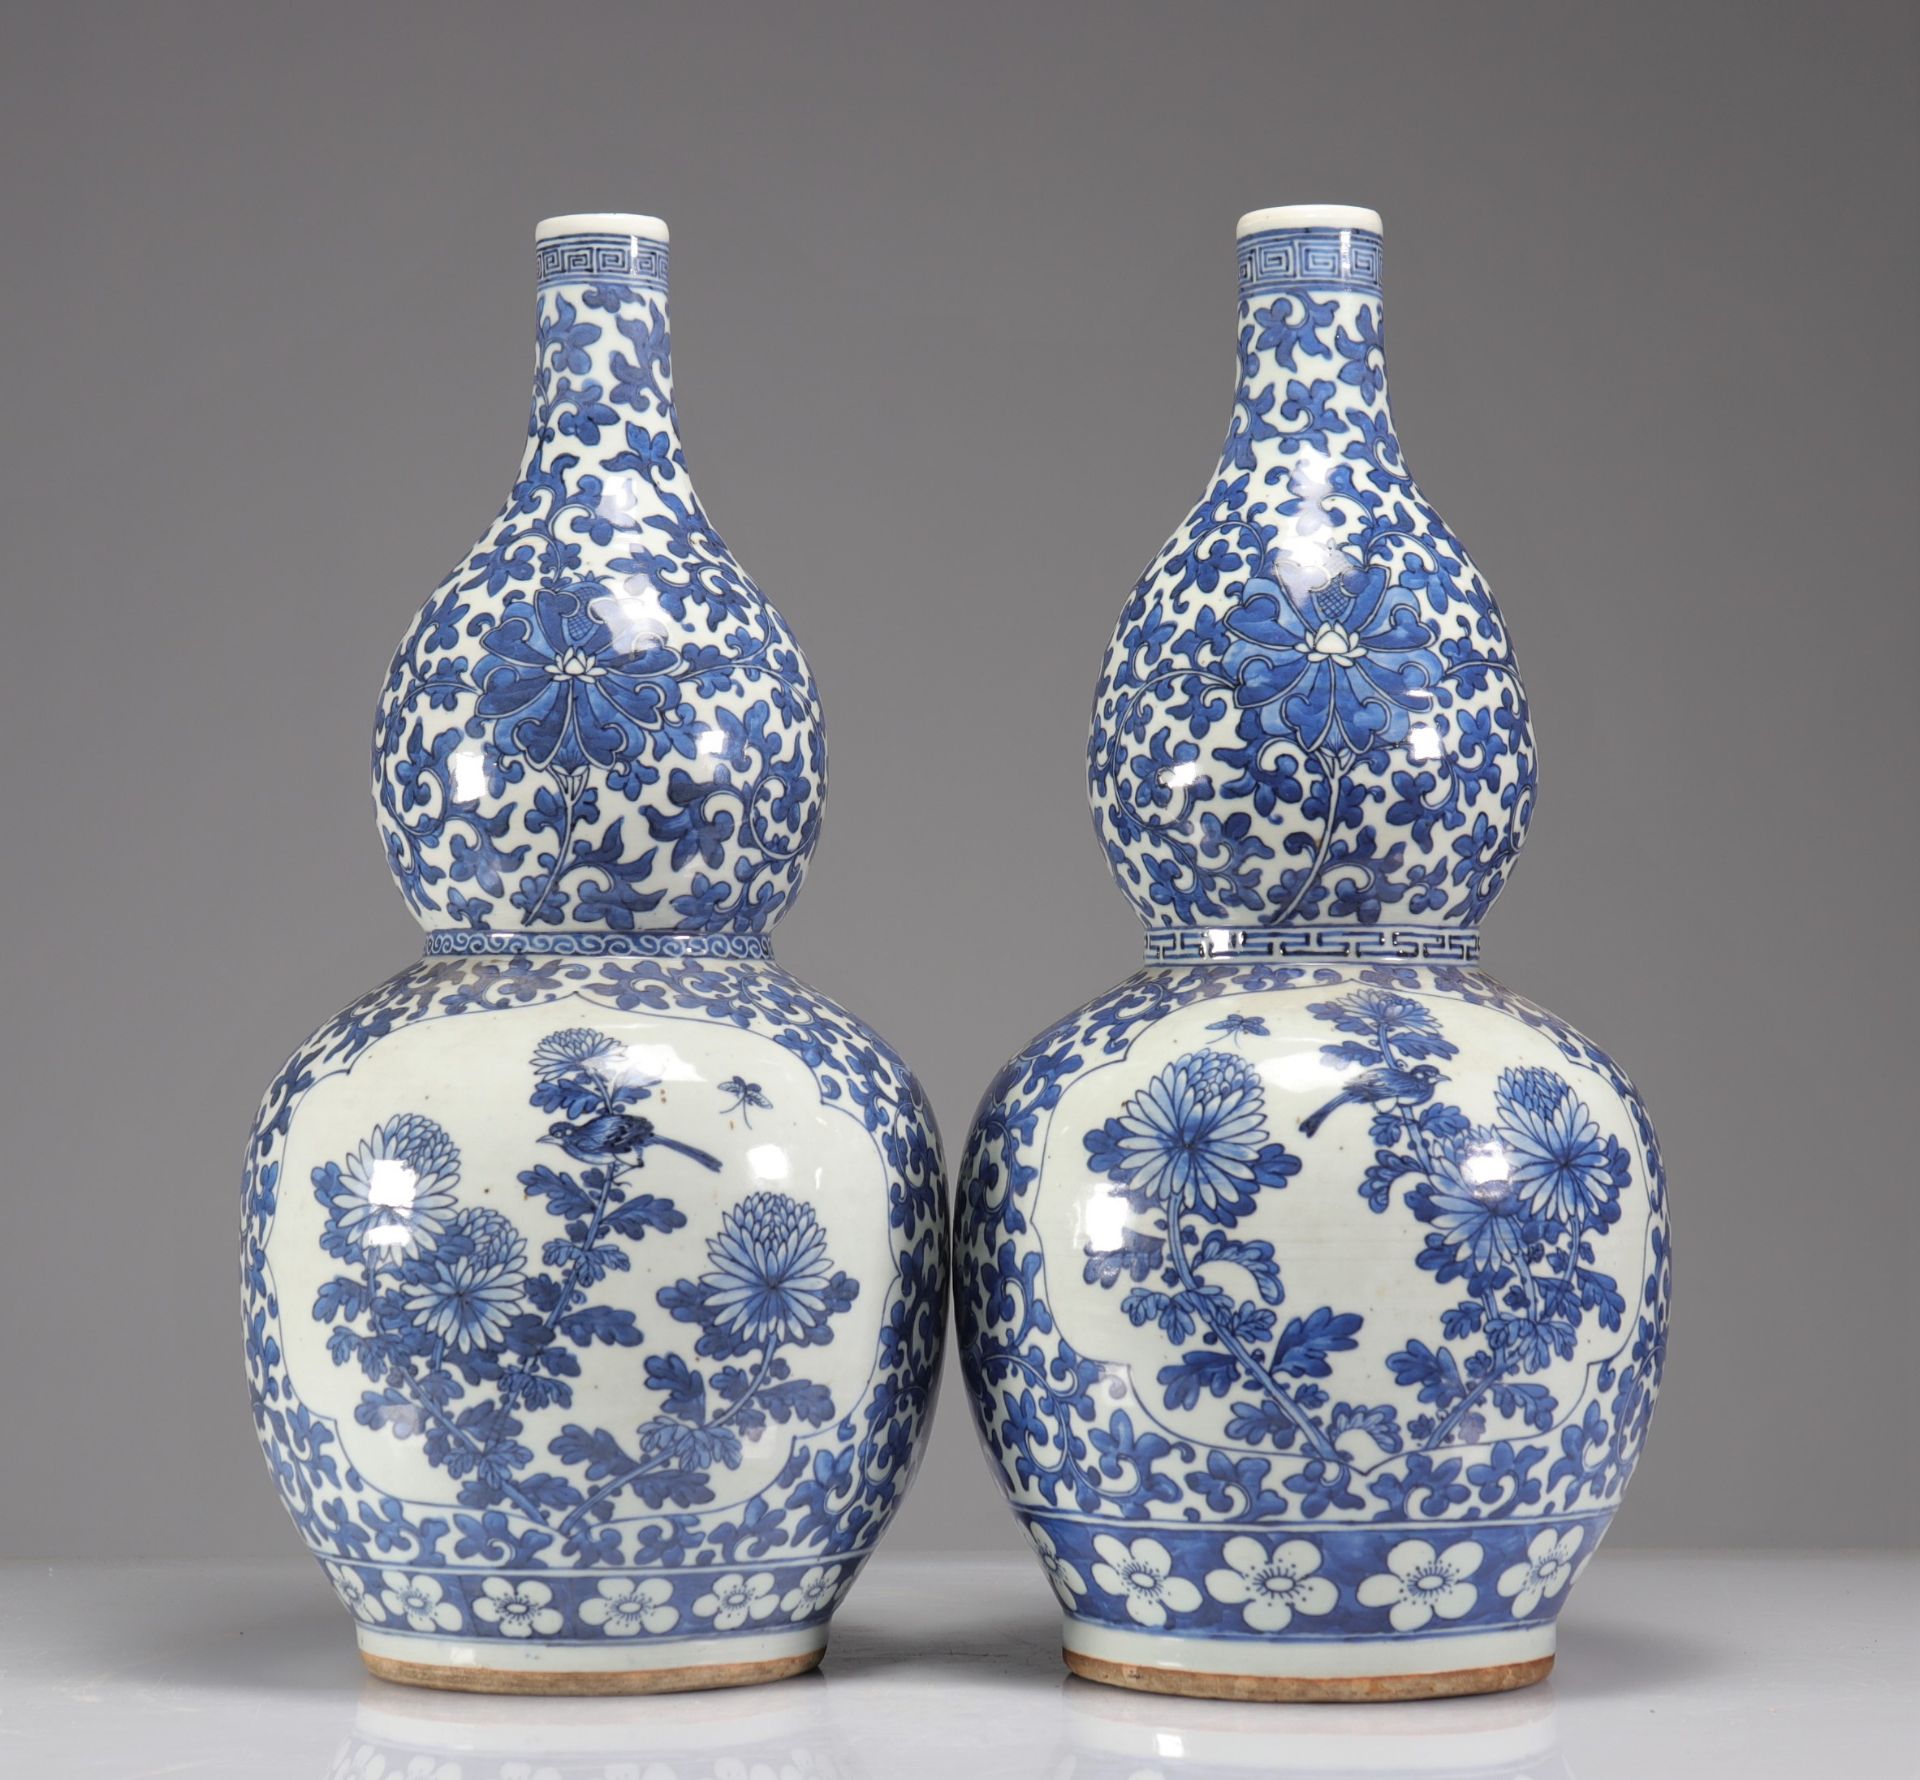 Pair of double-gourd vases in blue-white enamelled porcelain decorated with floriform medallions of